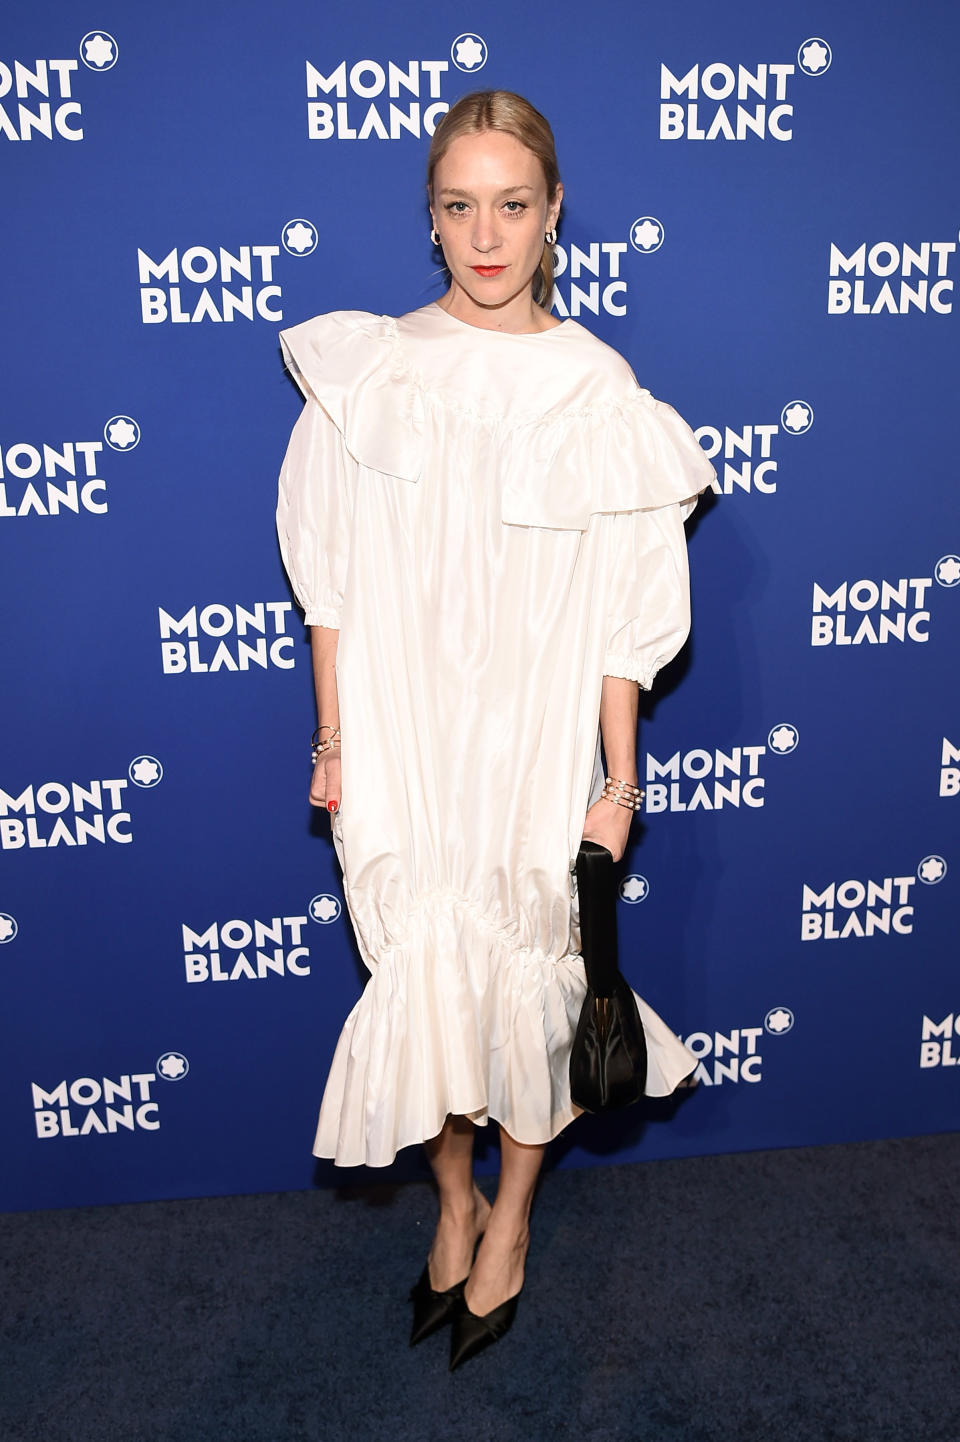 Chloe Sevigny at a Mont Blanc event